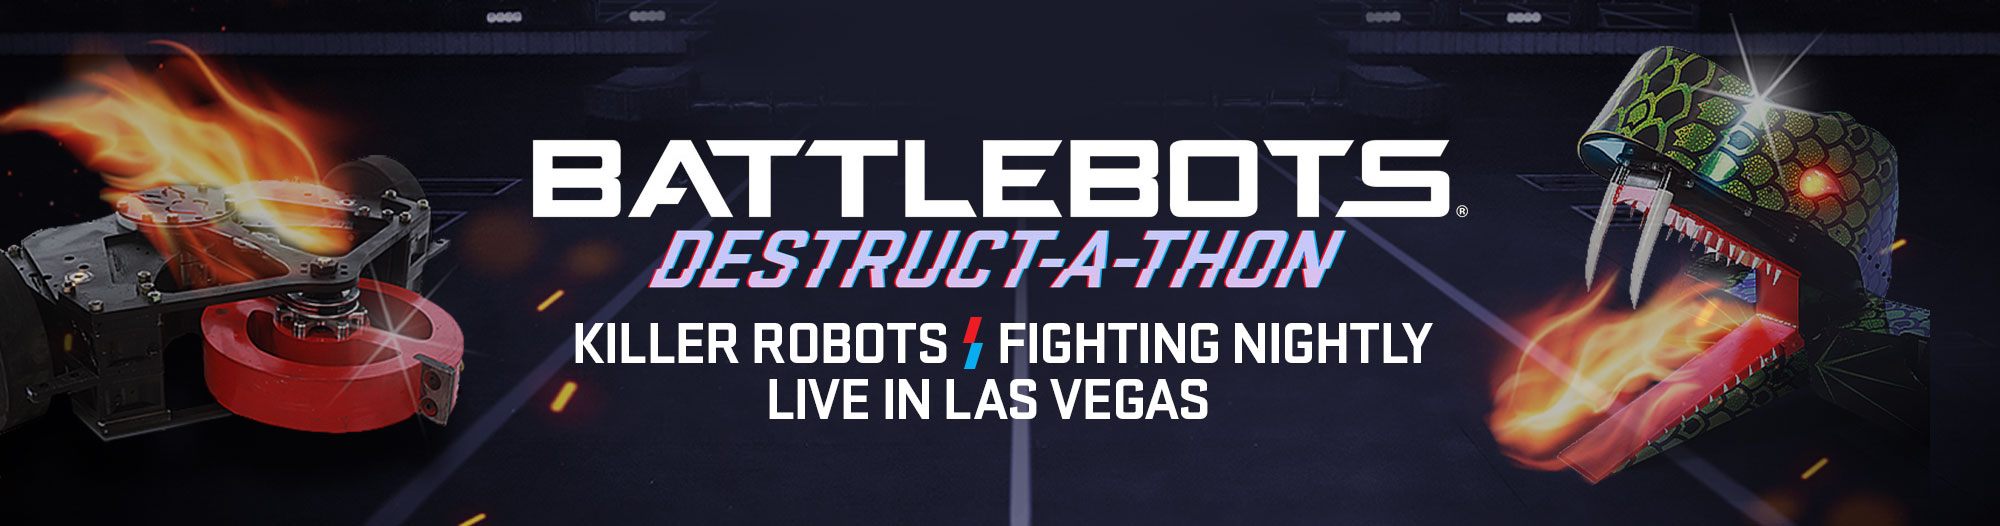 From the creators of the hit TV show BattleBots comes the world’s first daily robot-combat show. Come see BattleBots Destruct-A-Thon -- the best new, family friendly show in Las Vegas featuring killer robots fighting nightly!